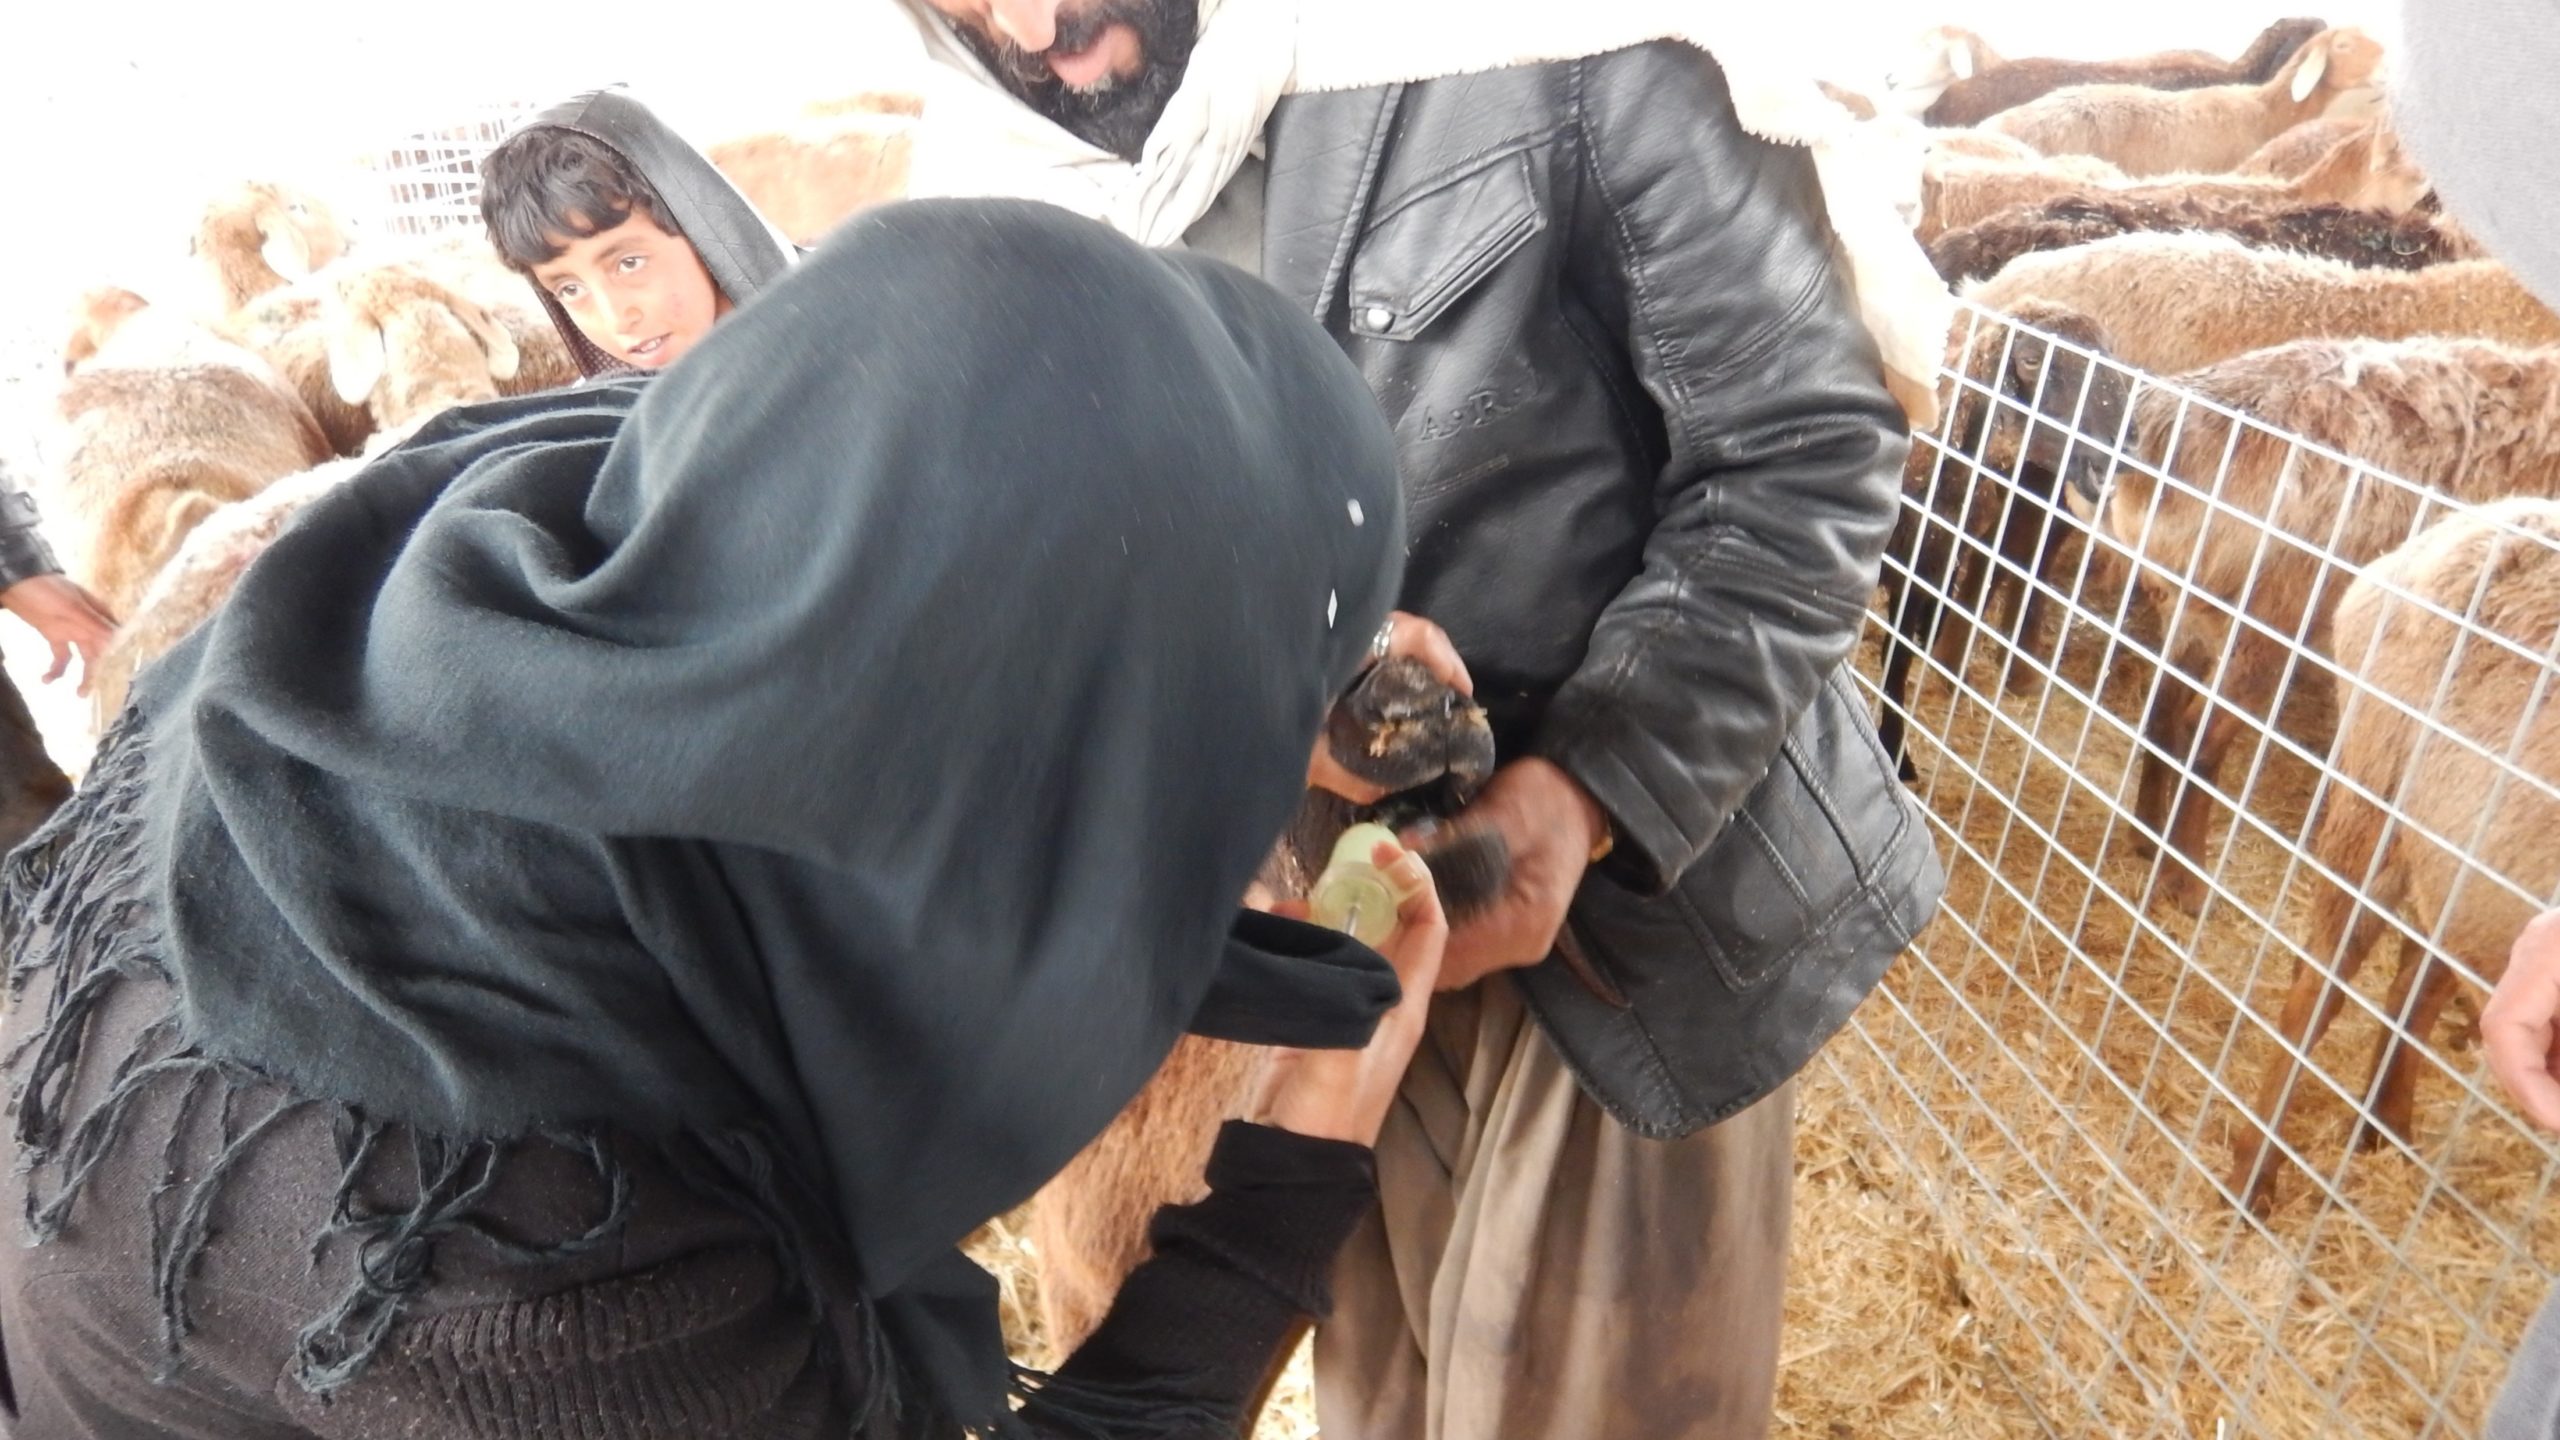 Three people in headscarf's oral syringing a goat